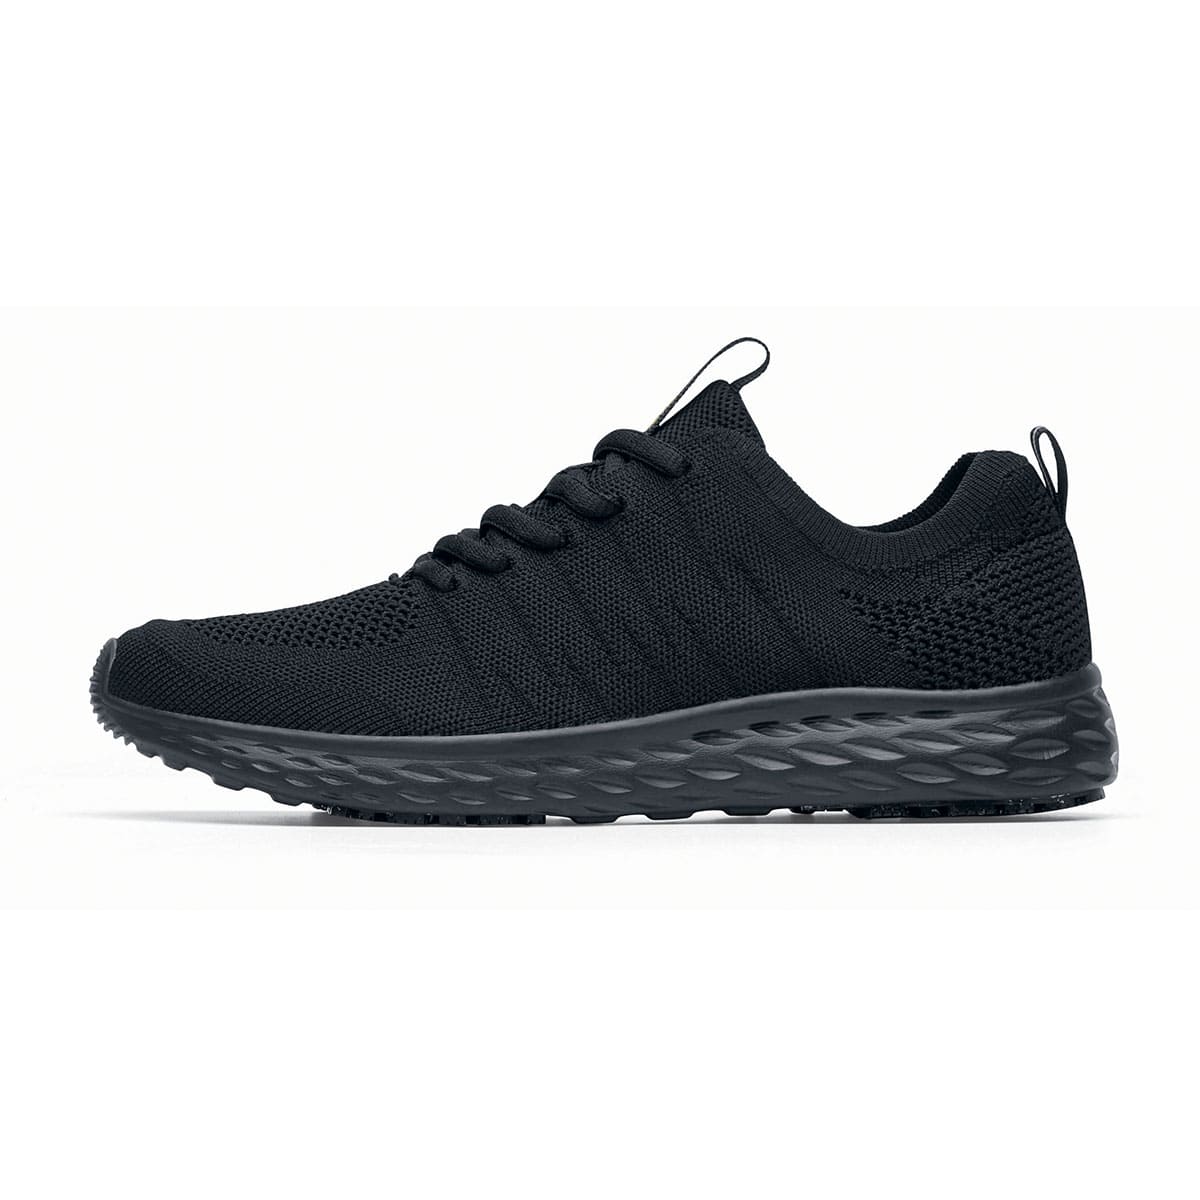 The Everlight™ Everlight Eco Women's Black from Shoes For Crews are lightweight and breathable slip-resistant trainers made from recycled materials, seen from the left.